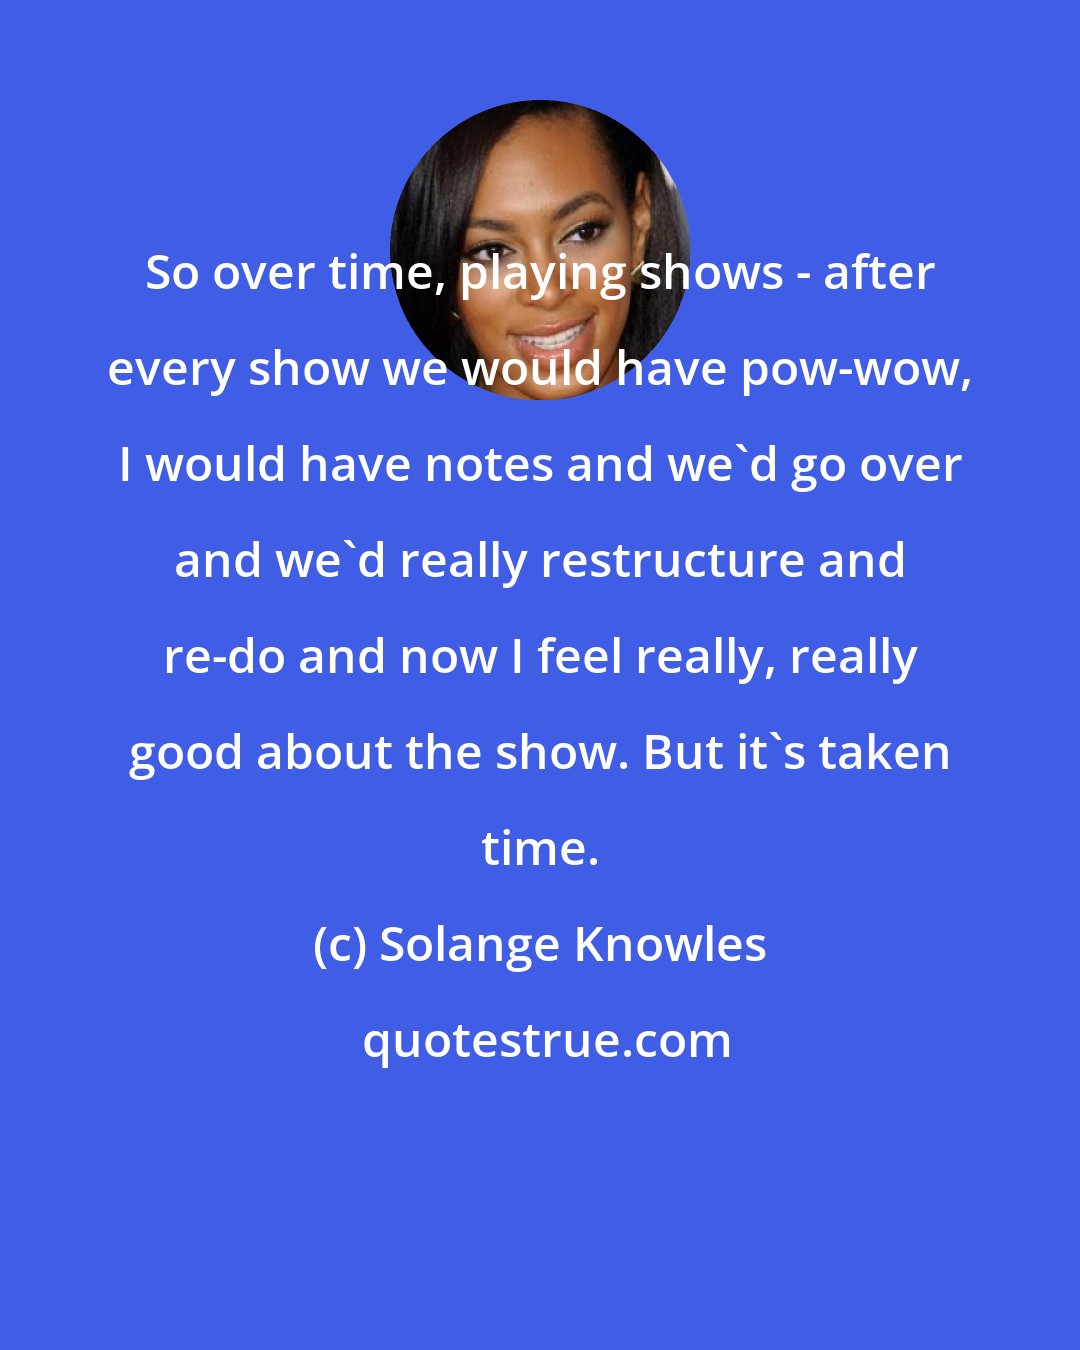 Solange Knowles: So over time, playing shows - after every show we would have pow-wow, I would have notes and we'd go over and we'd really restructure and re-do and now I feel really, really good about the show. But it's taken time.